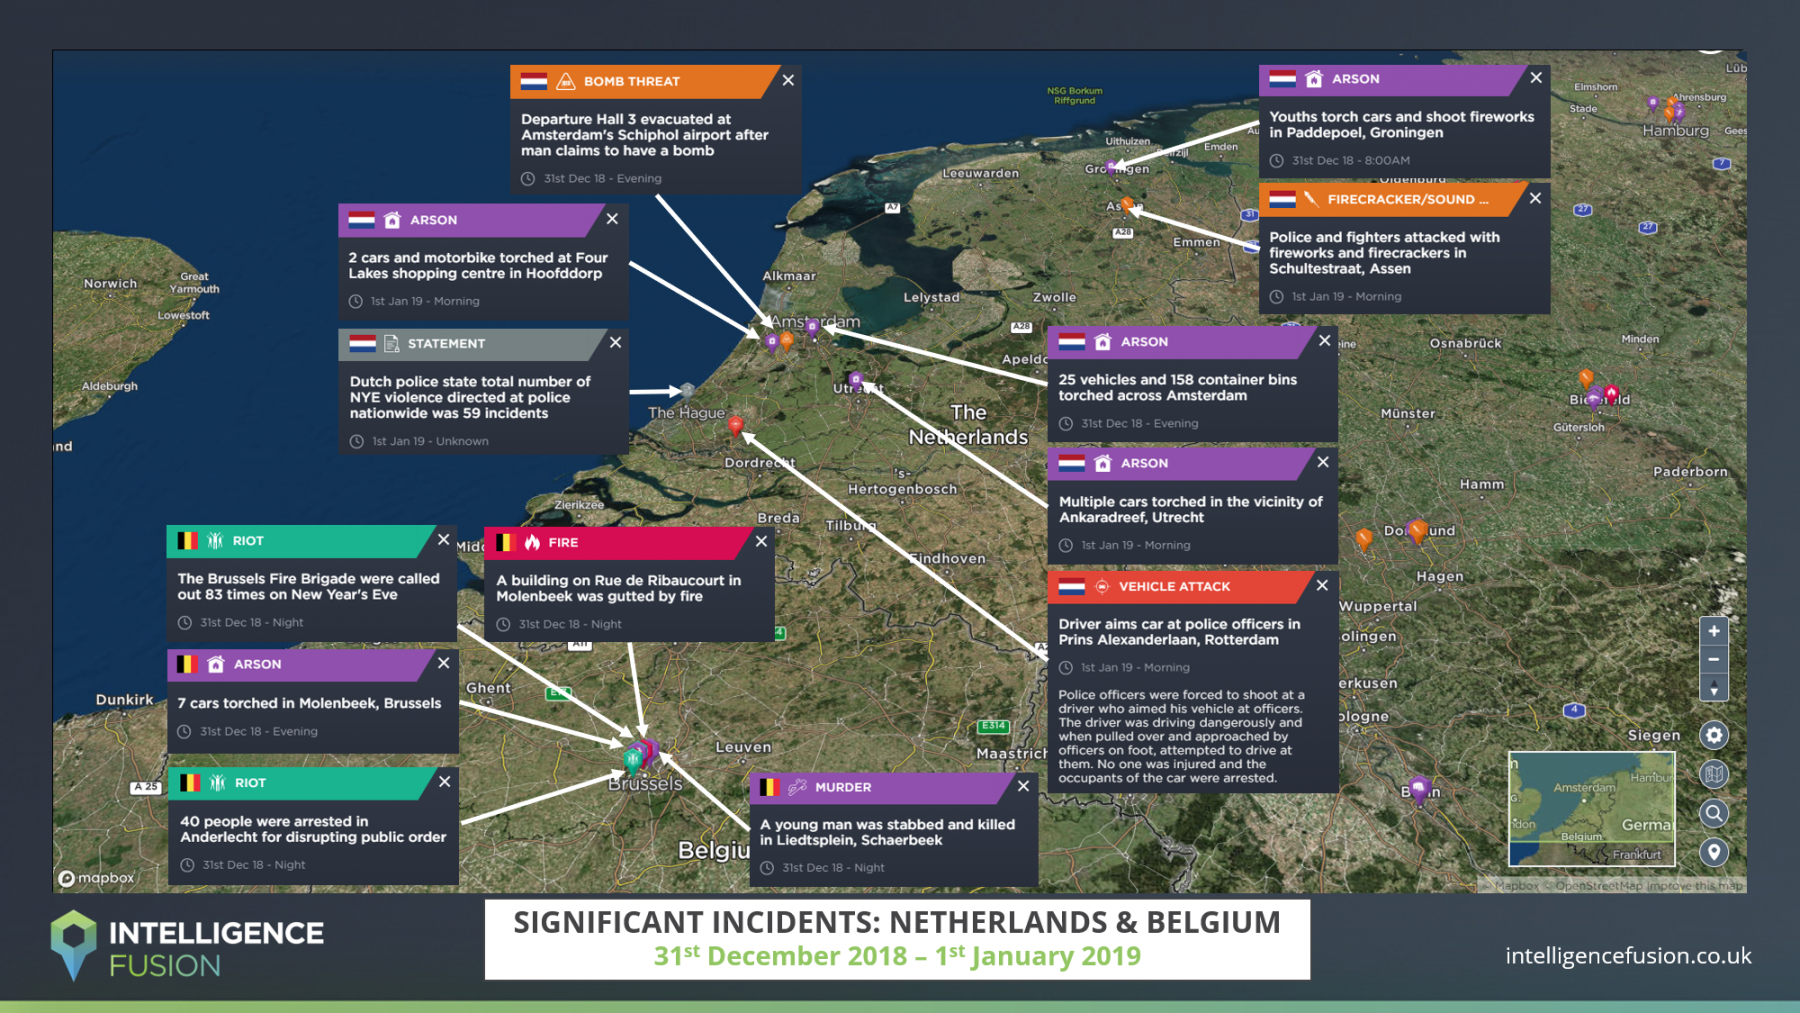 Crime across the Netherlands and Belgium as recorded by Intelligence Fusion on New Year's Eve 2018/19